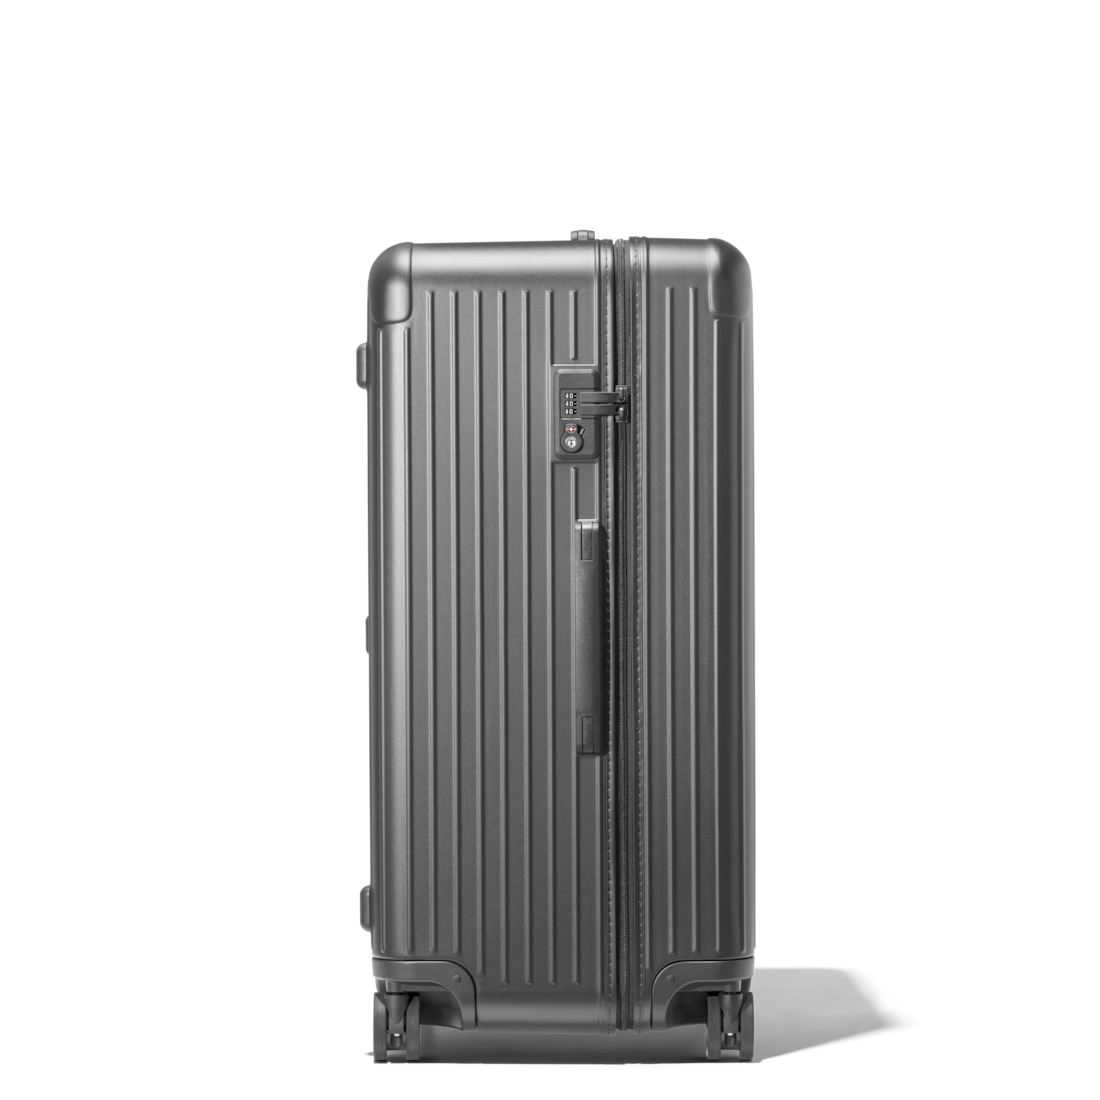 Your Rimowa damaged or stolen. Now what?!